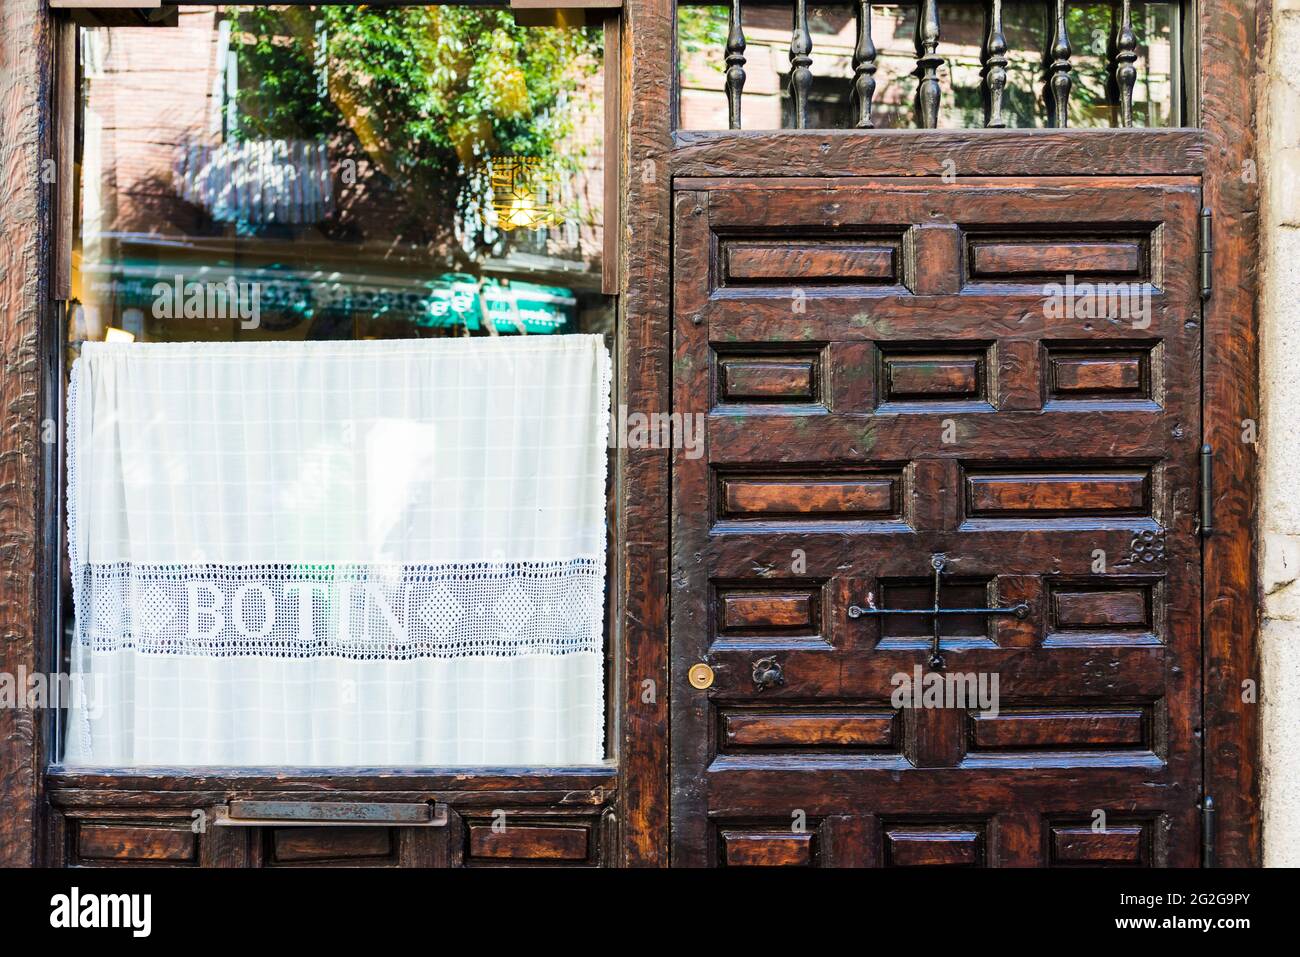 Entrance gate. Sobrino de Botín is a Spanish restaurant in Madrid, founded in 1725,that is the oldest restaurant in the world in continuous operation. Stock Photo